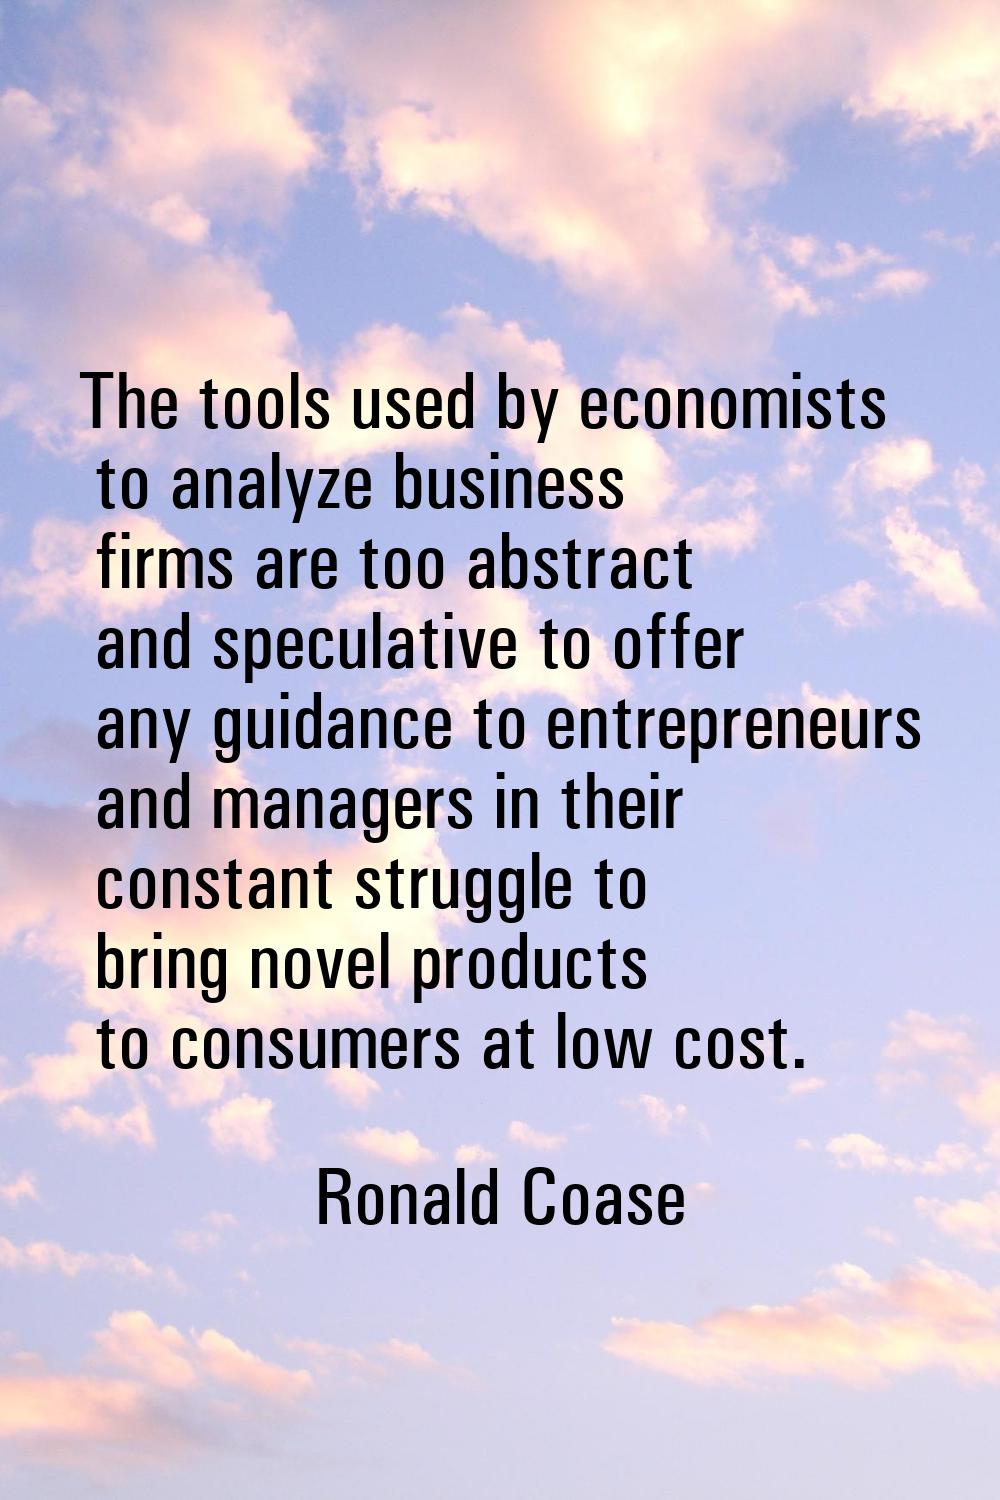 The tools used by economists to analyze business firms are too abstract and speculative to offer an